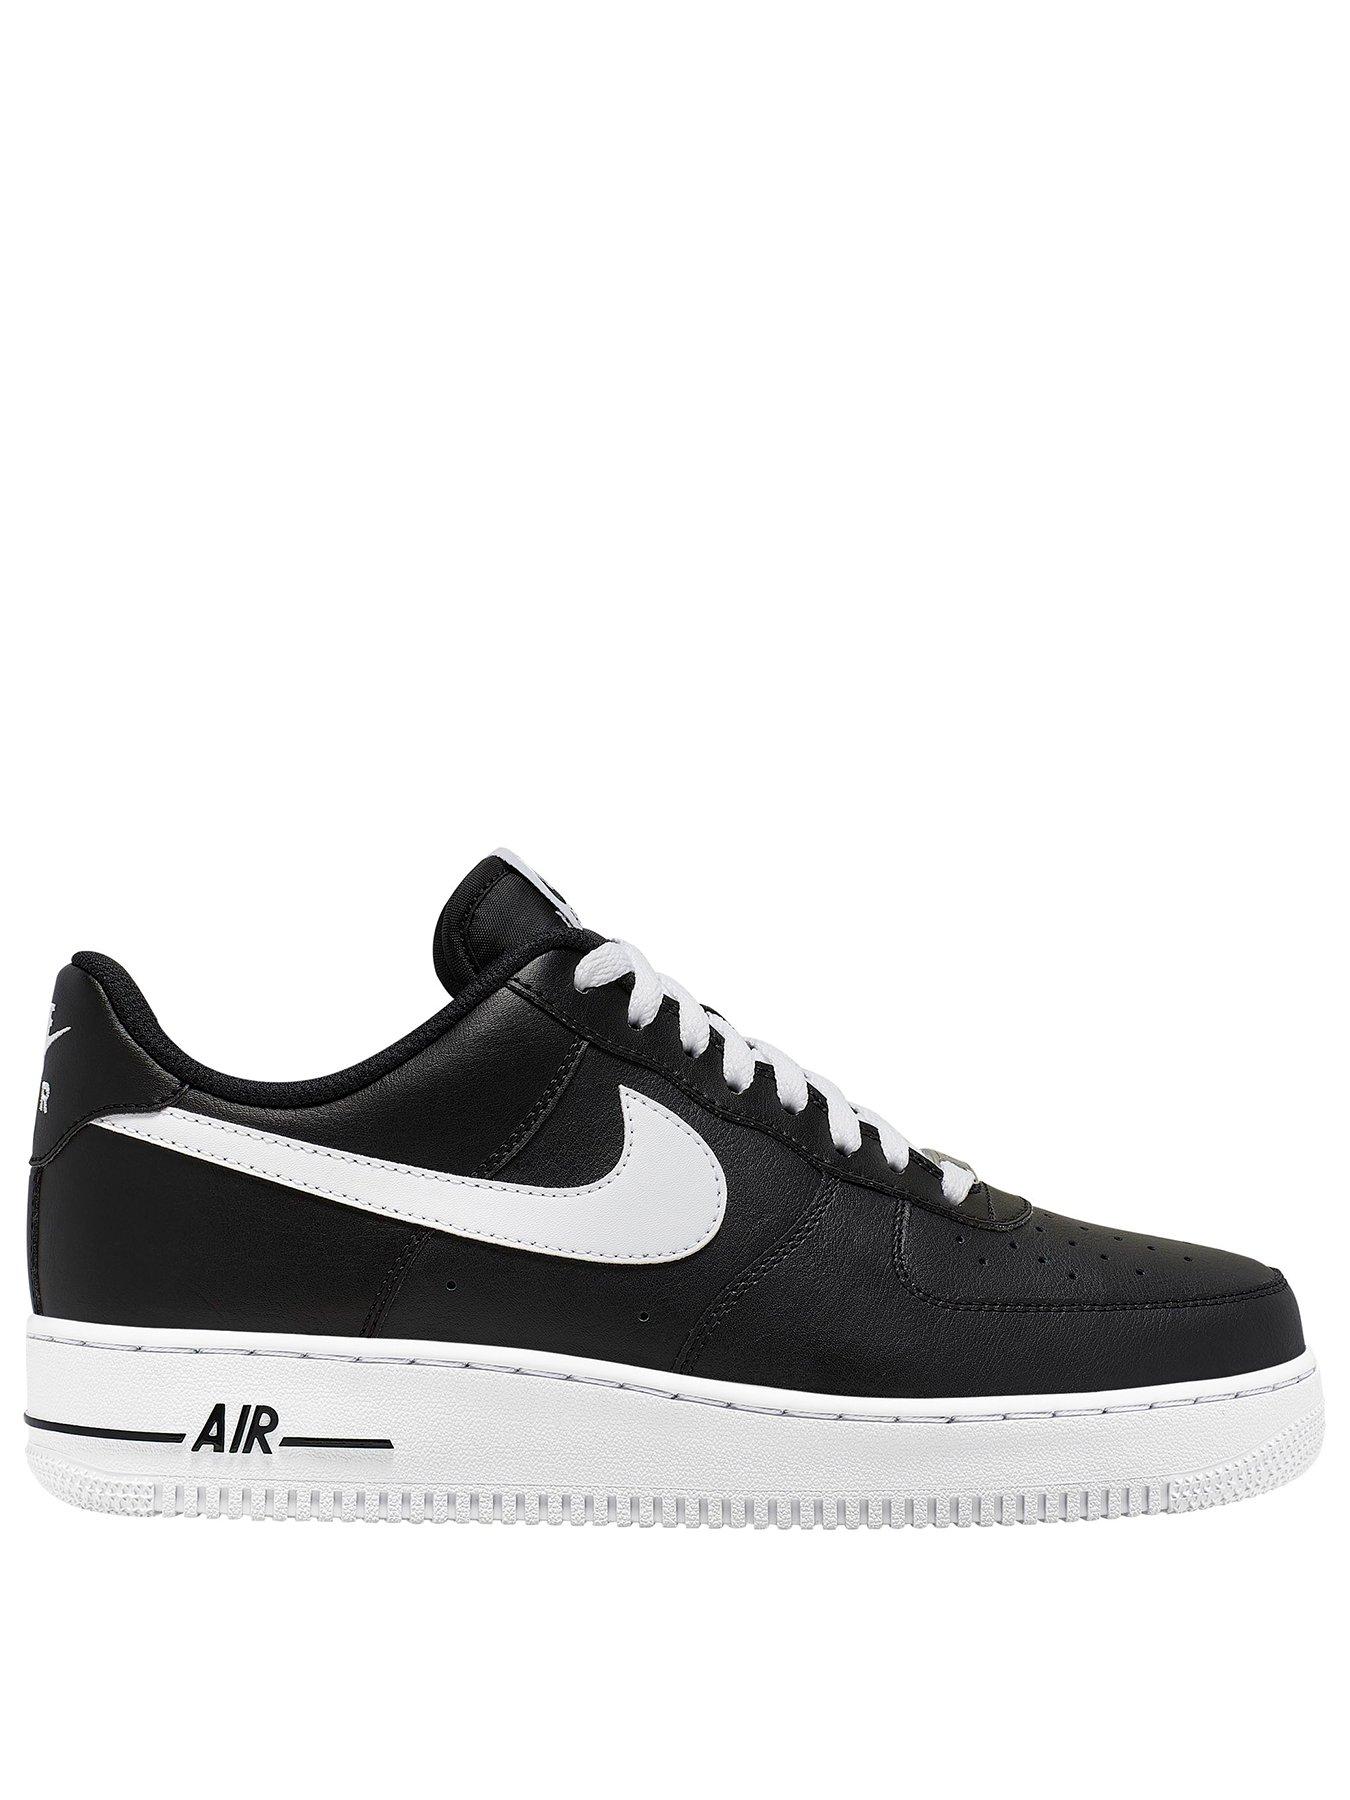 air force 1 07 size 6